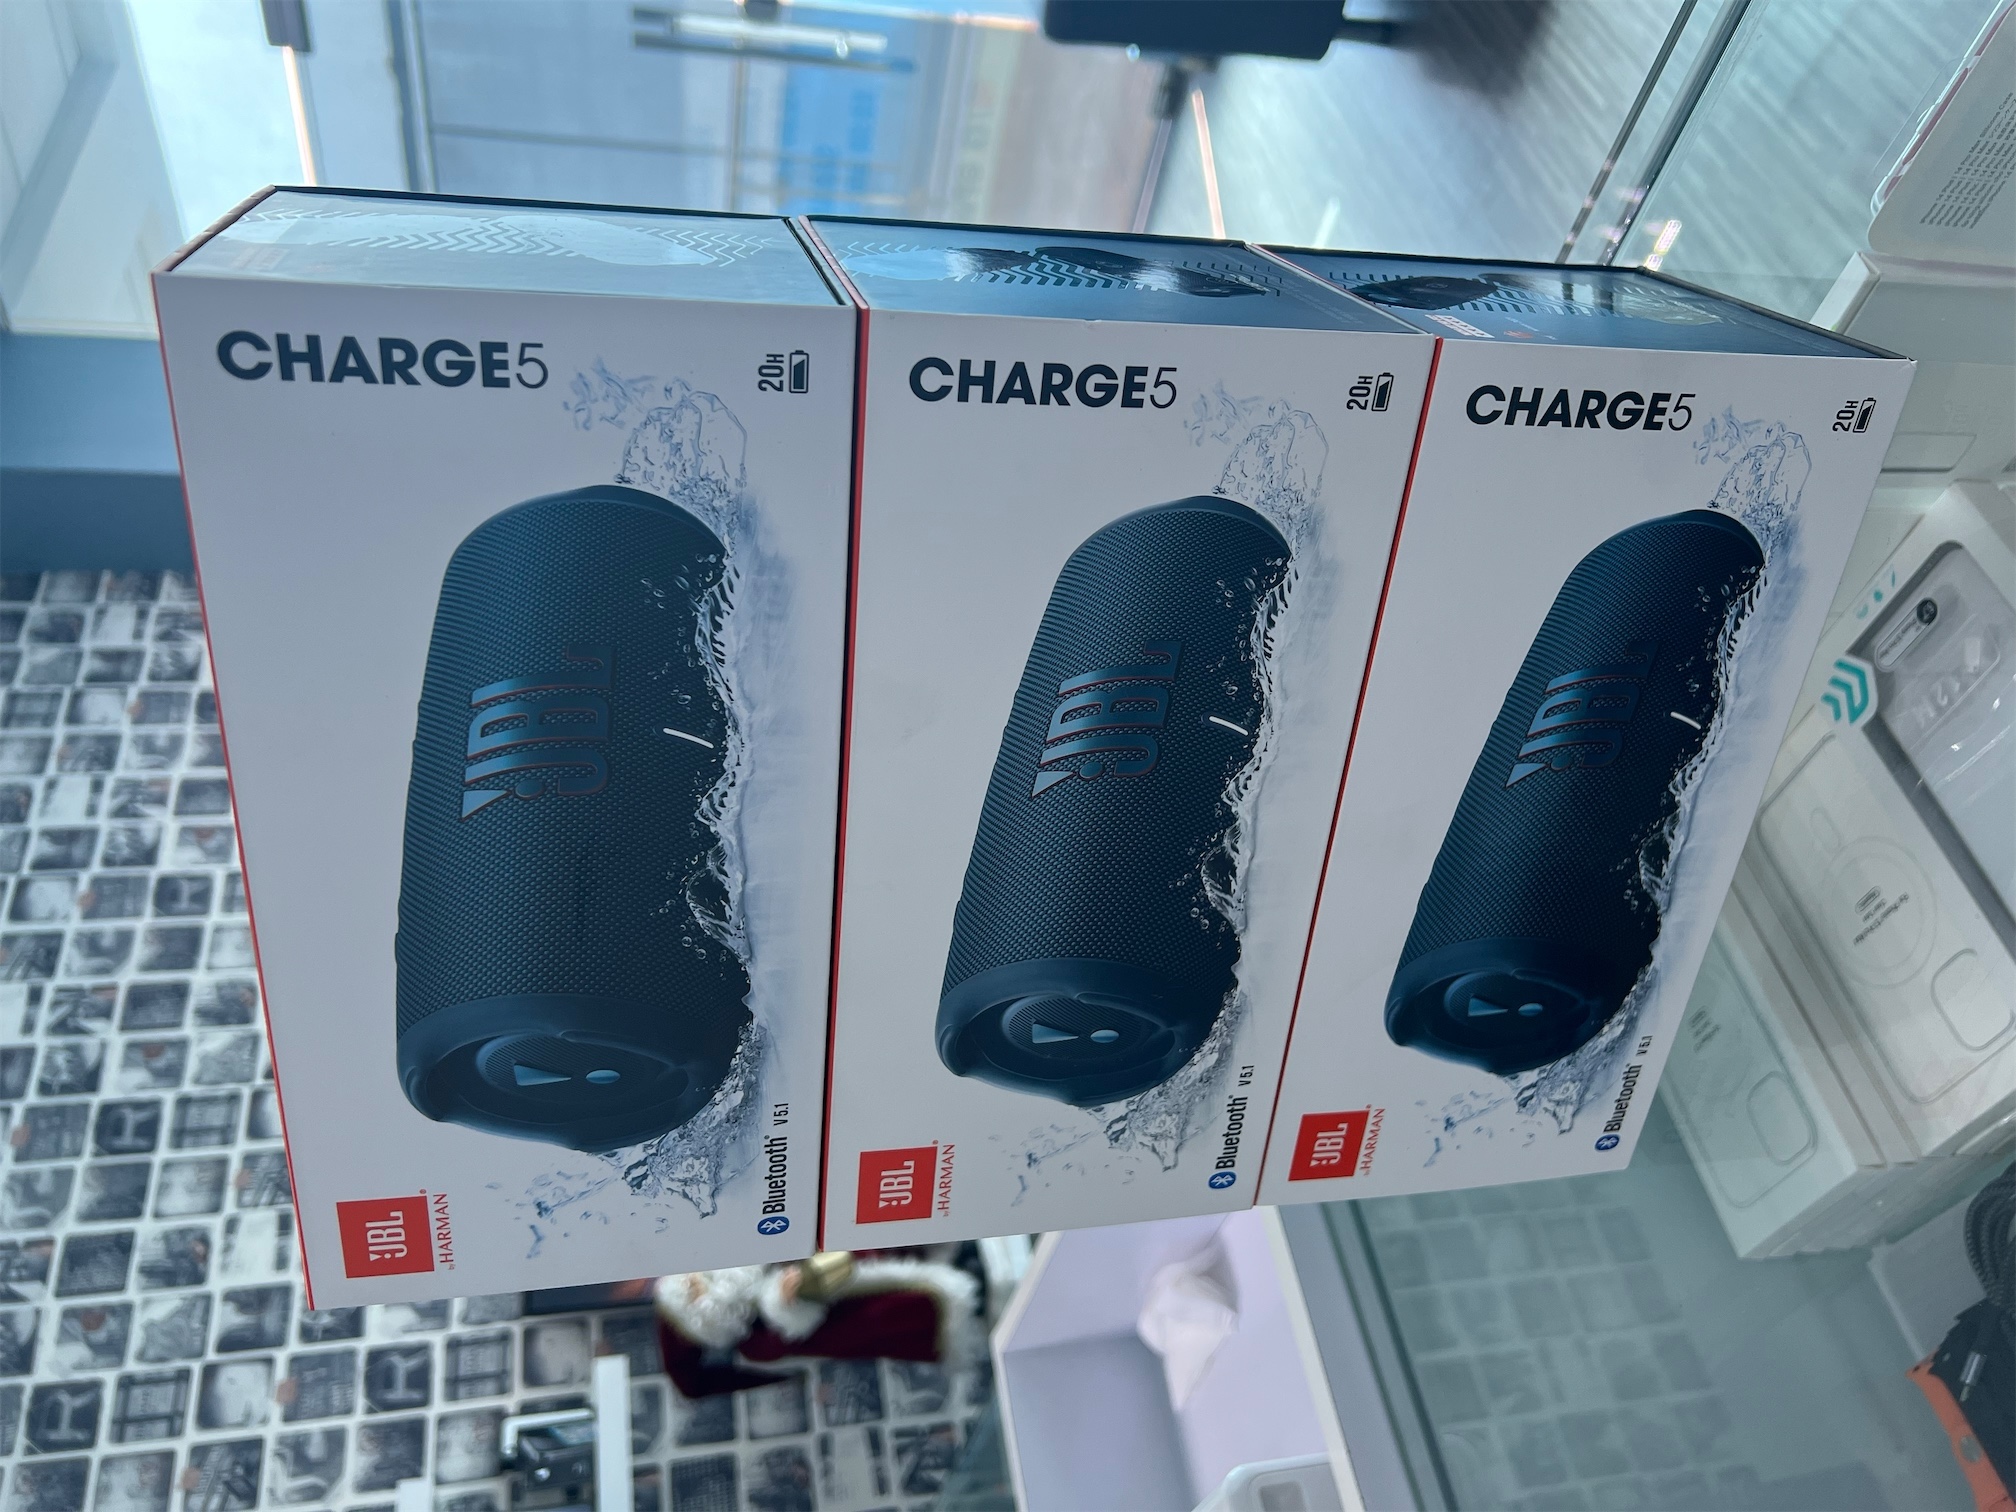 otros electronicos - Jbl charge 5